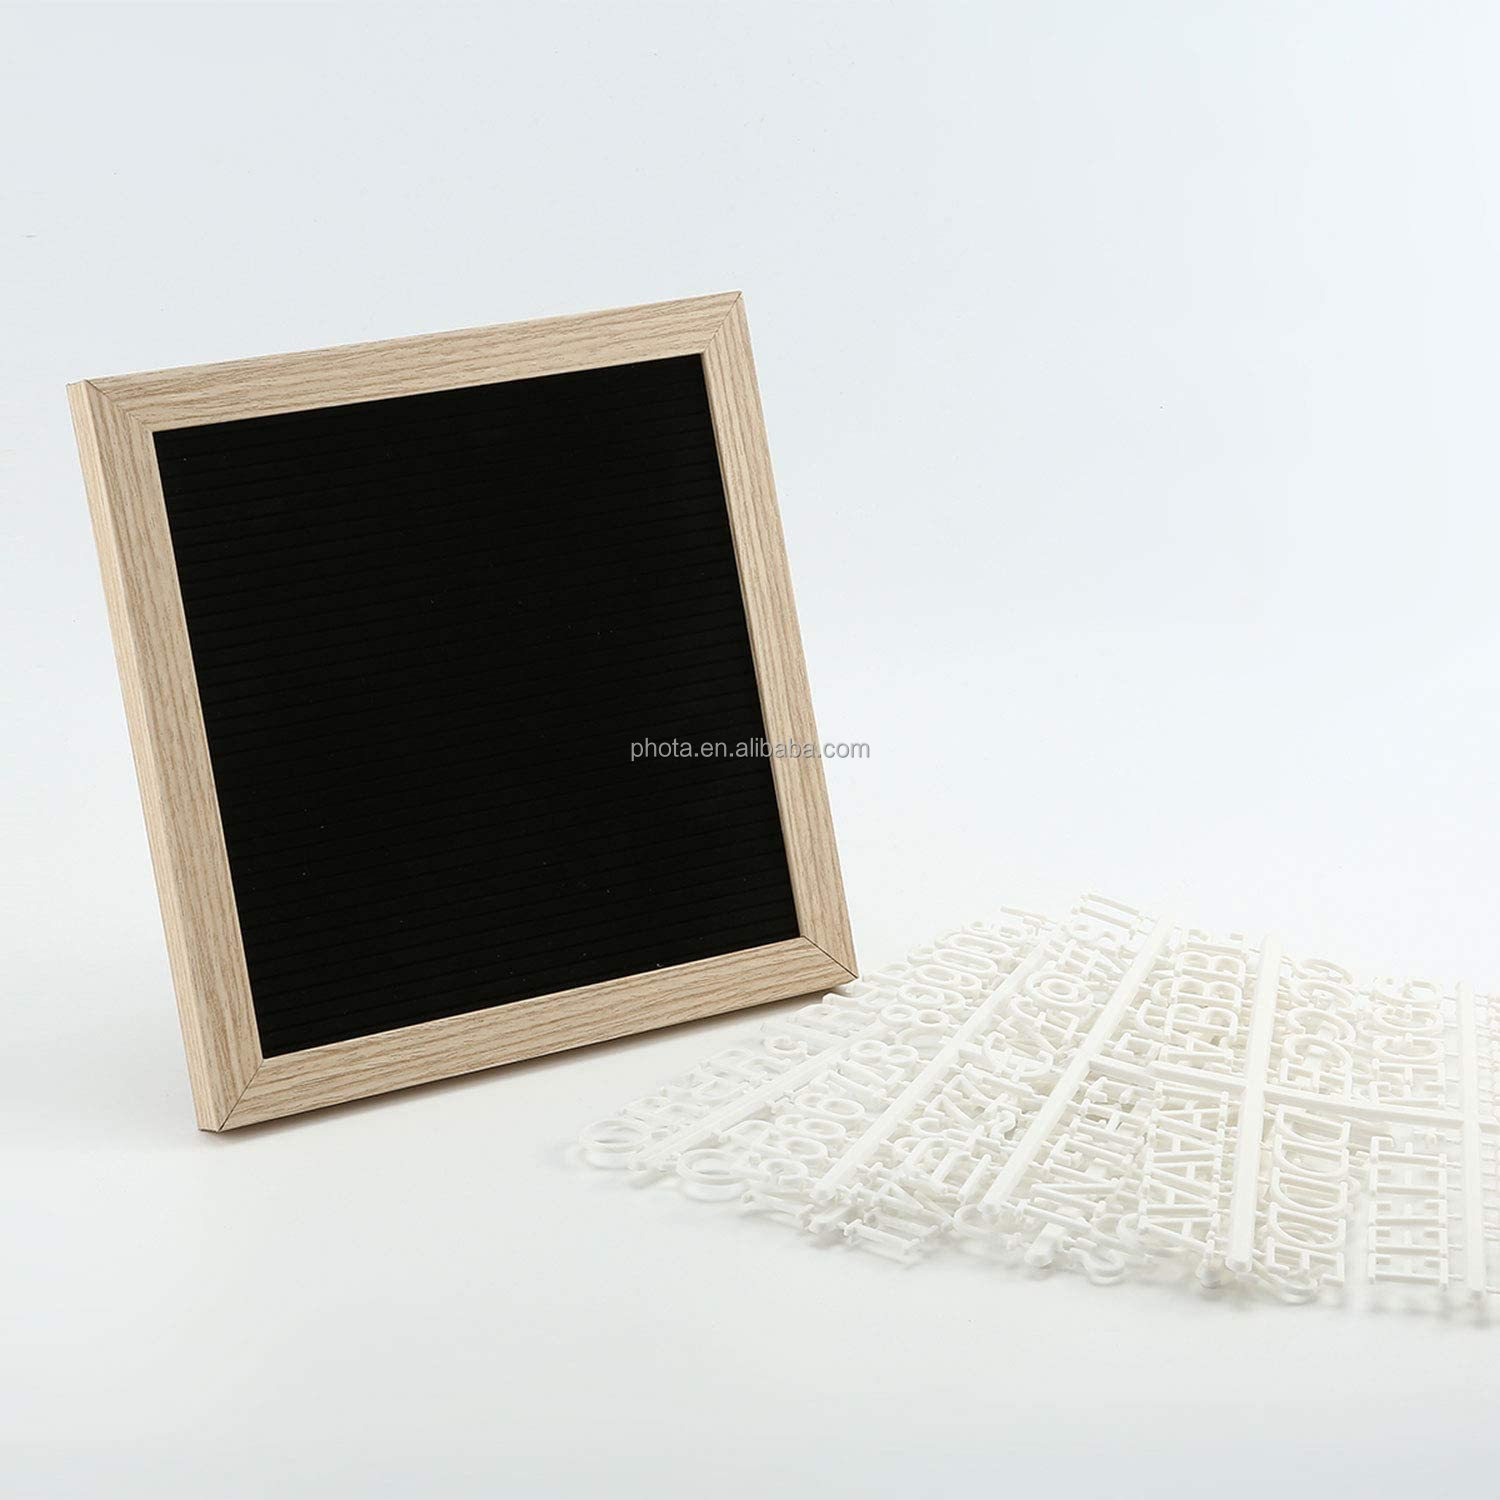 Felt Letter Board 10x10 Inches Changeable Wooden Message Board Sign Wood Frame Wall Mount Free Standing